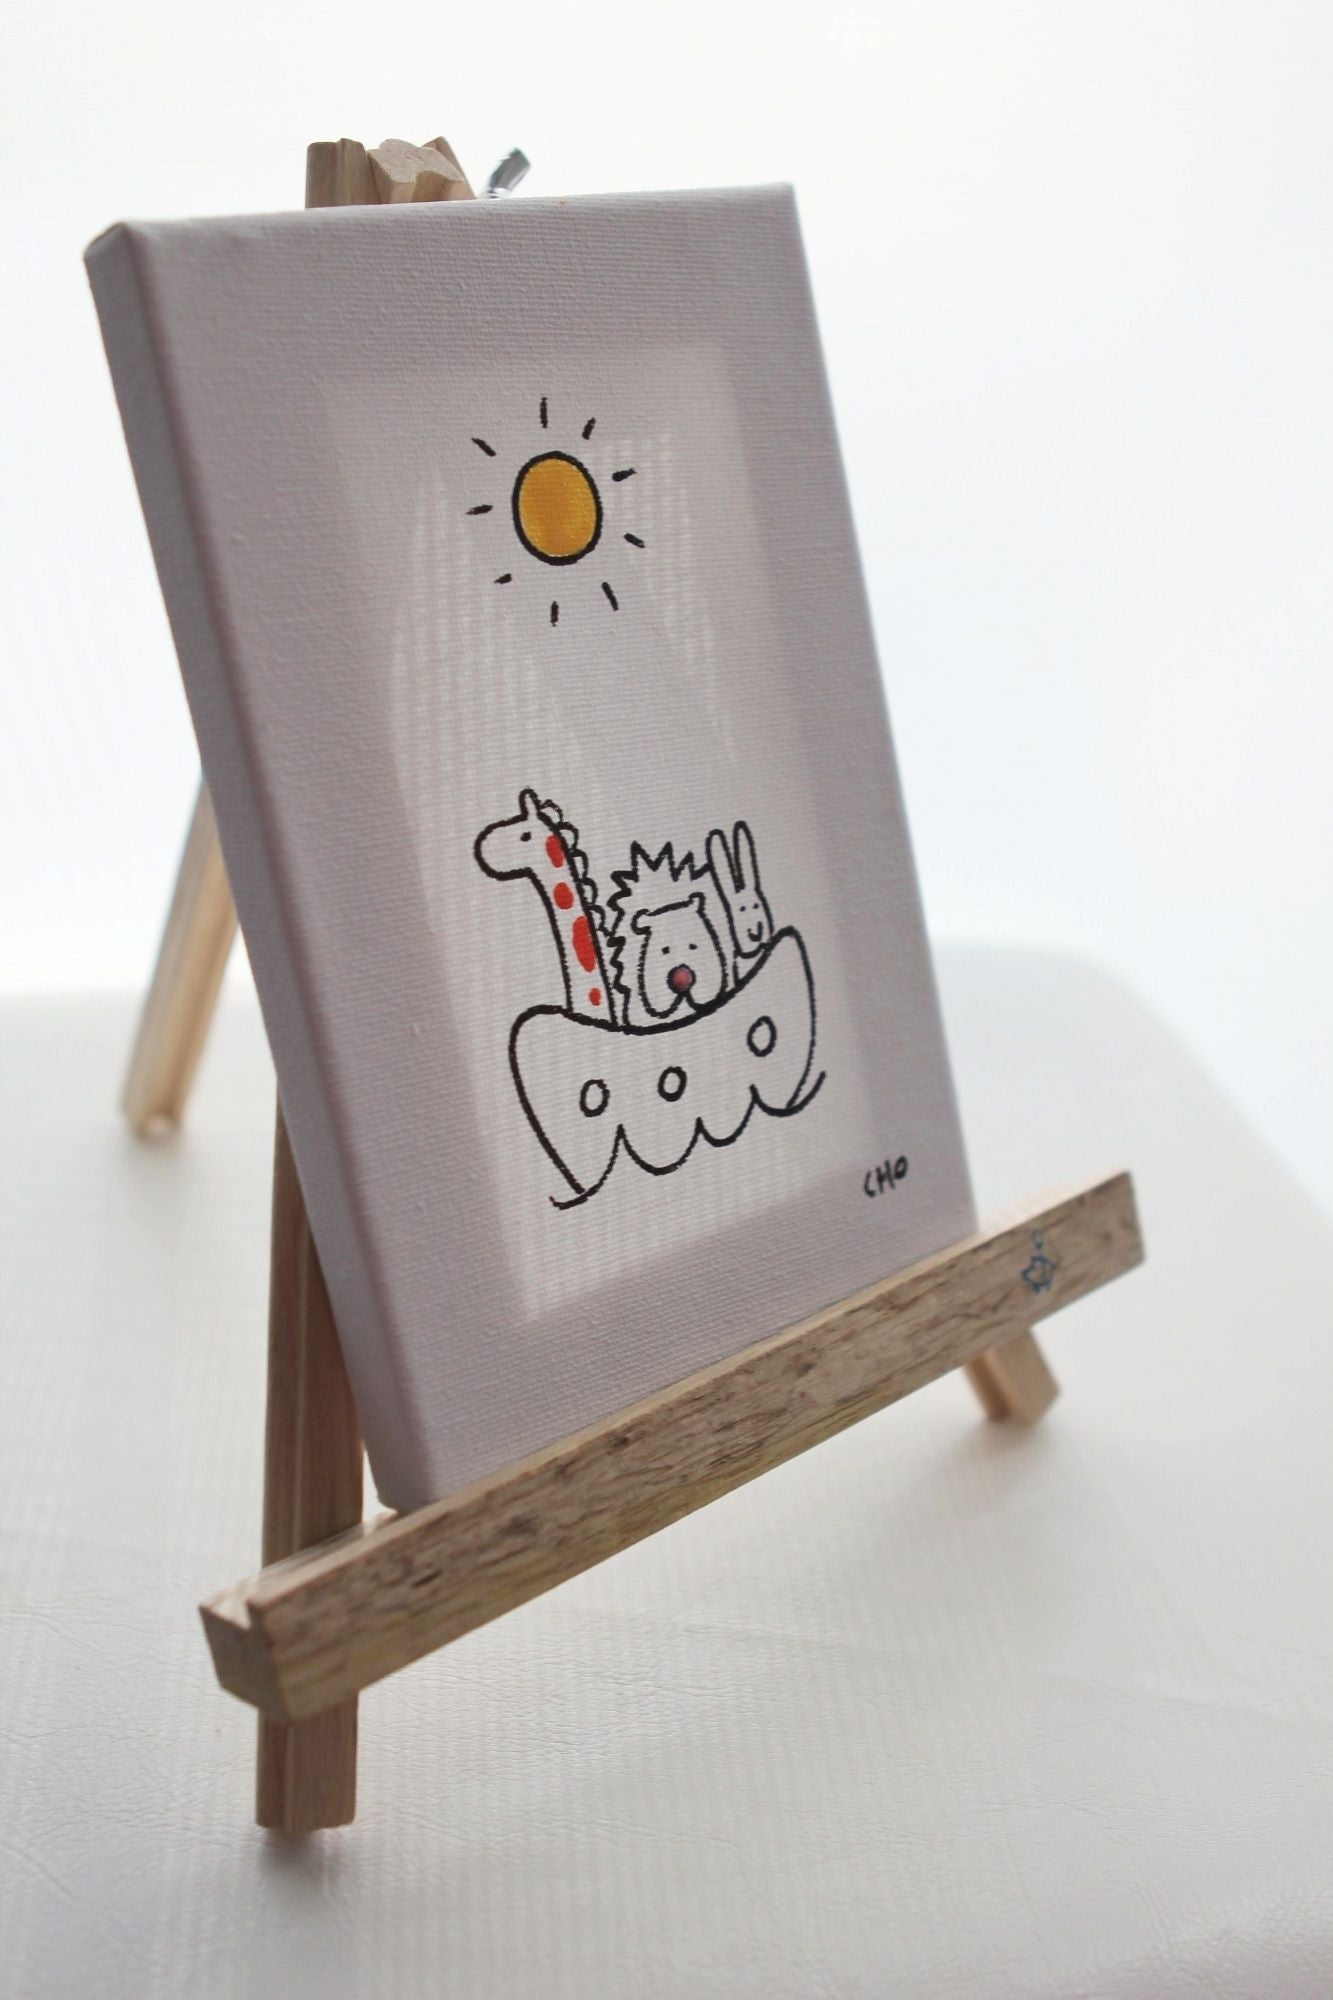 Mini Cho's Ark with Easel by Wendy Cho, Once Upon a Design